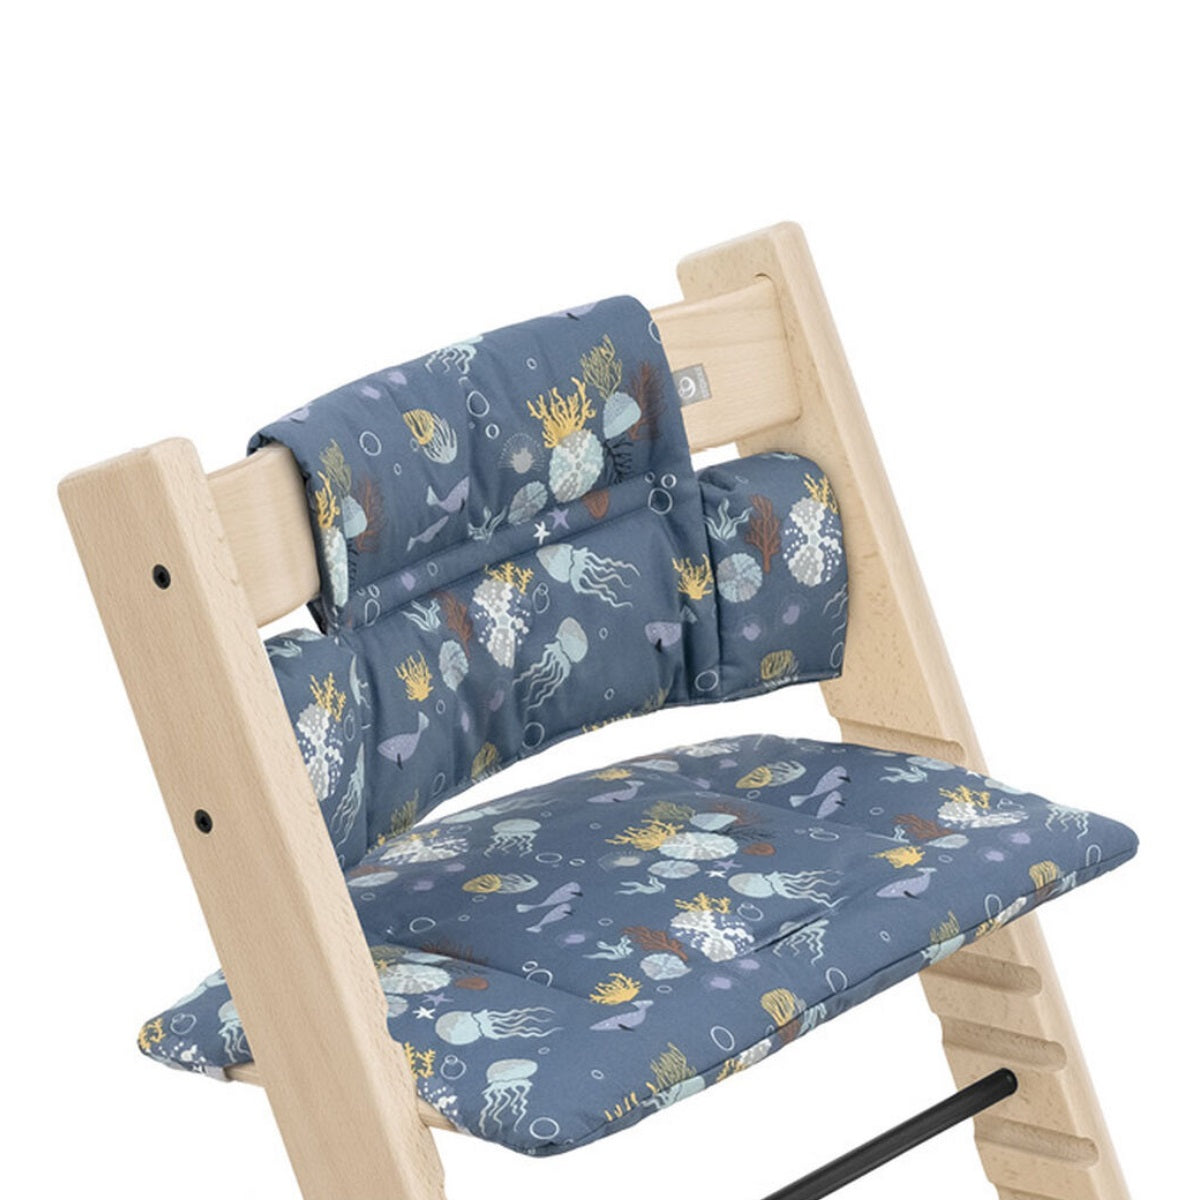 Stokke Tripp Trapp Classic Cushion (Into The Deep)